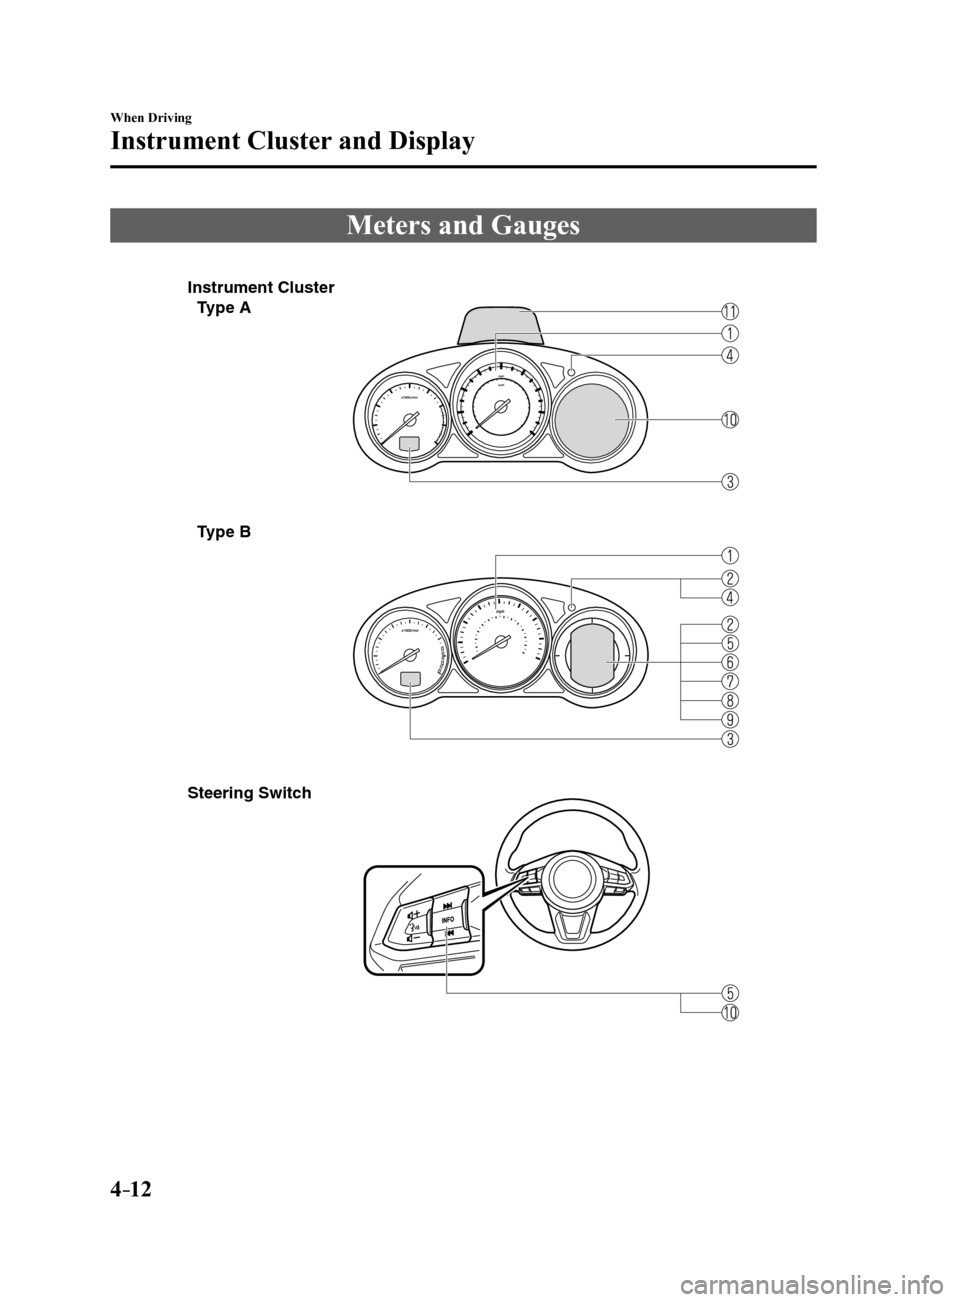 MAZDA MODEL 6 2017  Owners Manual (in English) 4–12
When Driving
Instrument Cluster and Display
Meters and Gauges
Instrument Cluster
Type A
T ype B
Steering Switch
Mazda6_8FH2-EA-16F_Edition2.indb   122016/07/07   13:44:34   